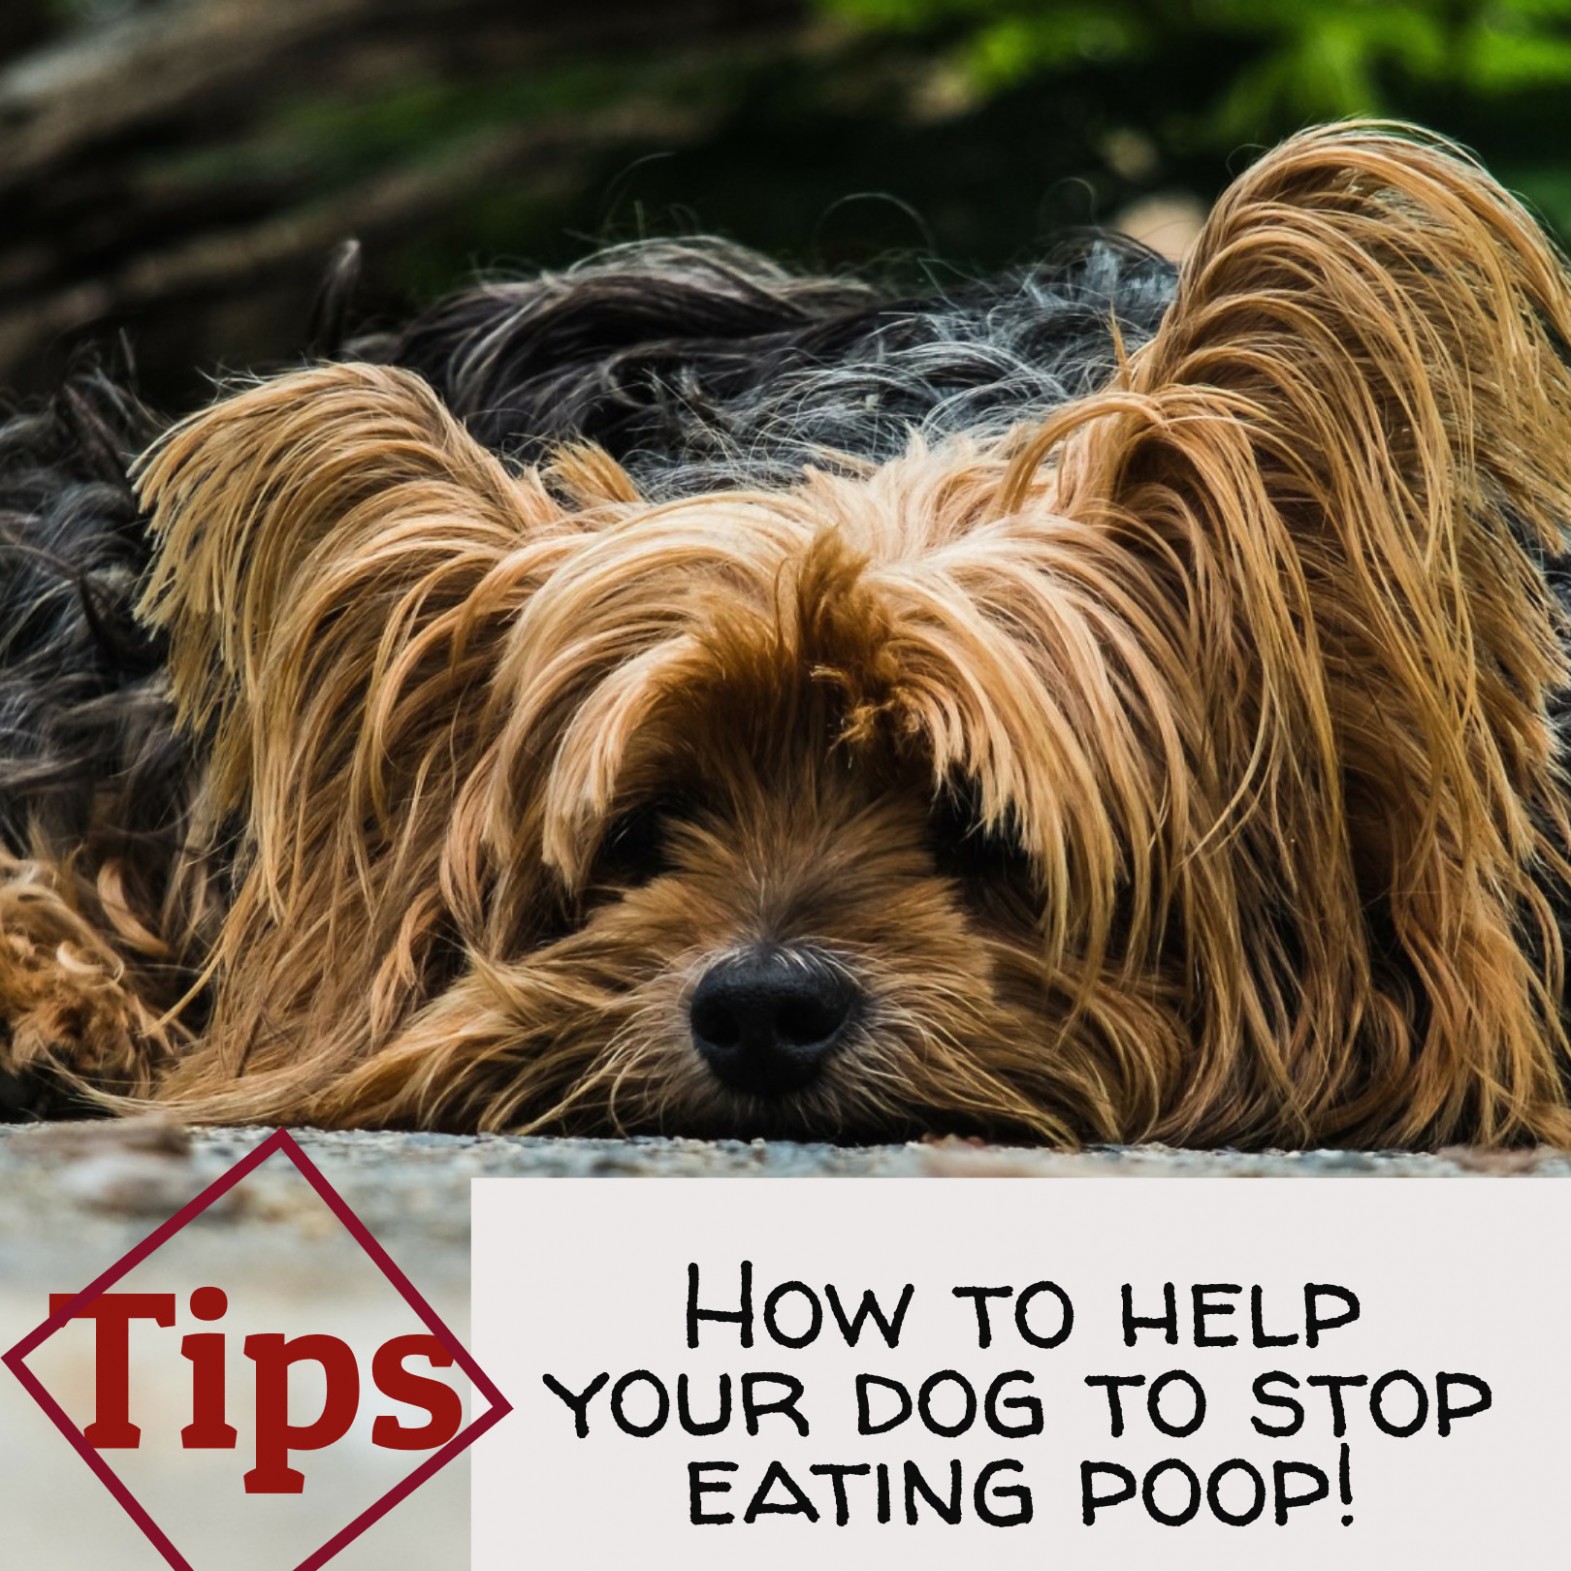 1517657589 How To Help Your Dog To Stop Eating Poop Tips Yorkie Dog Posh.jpg